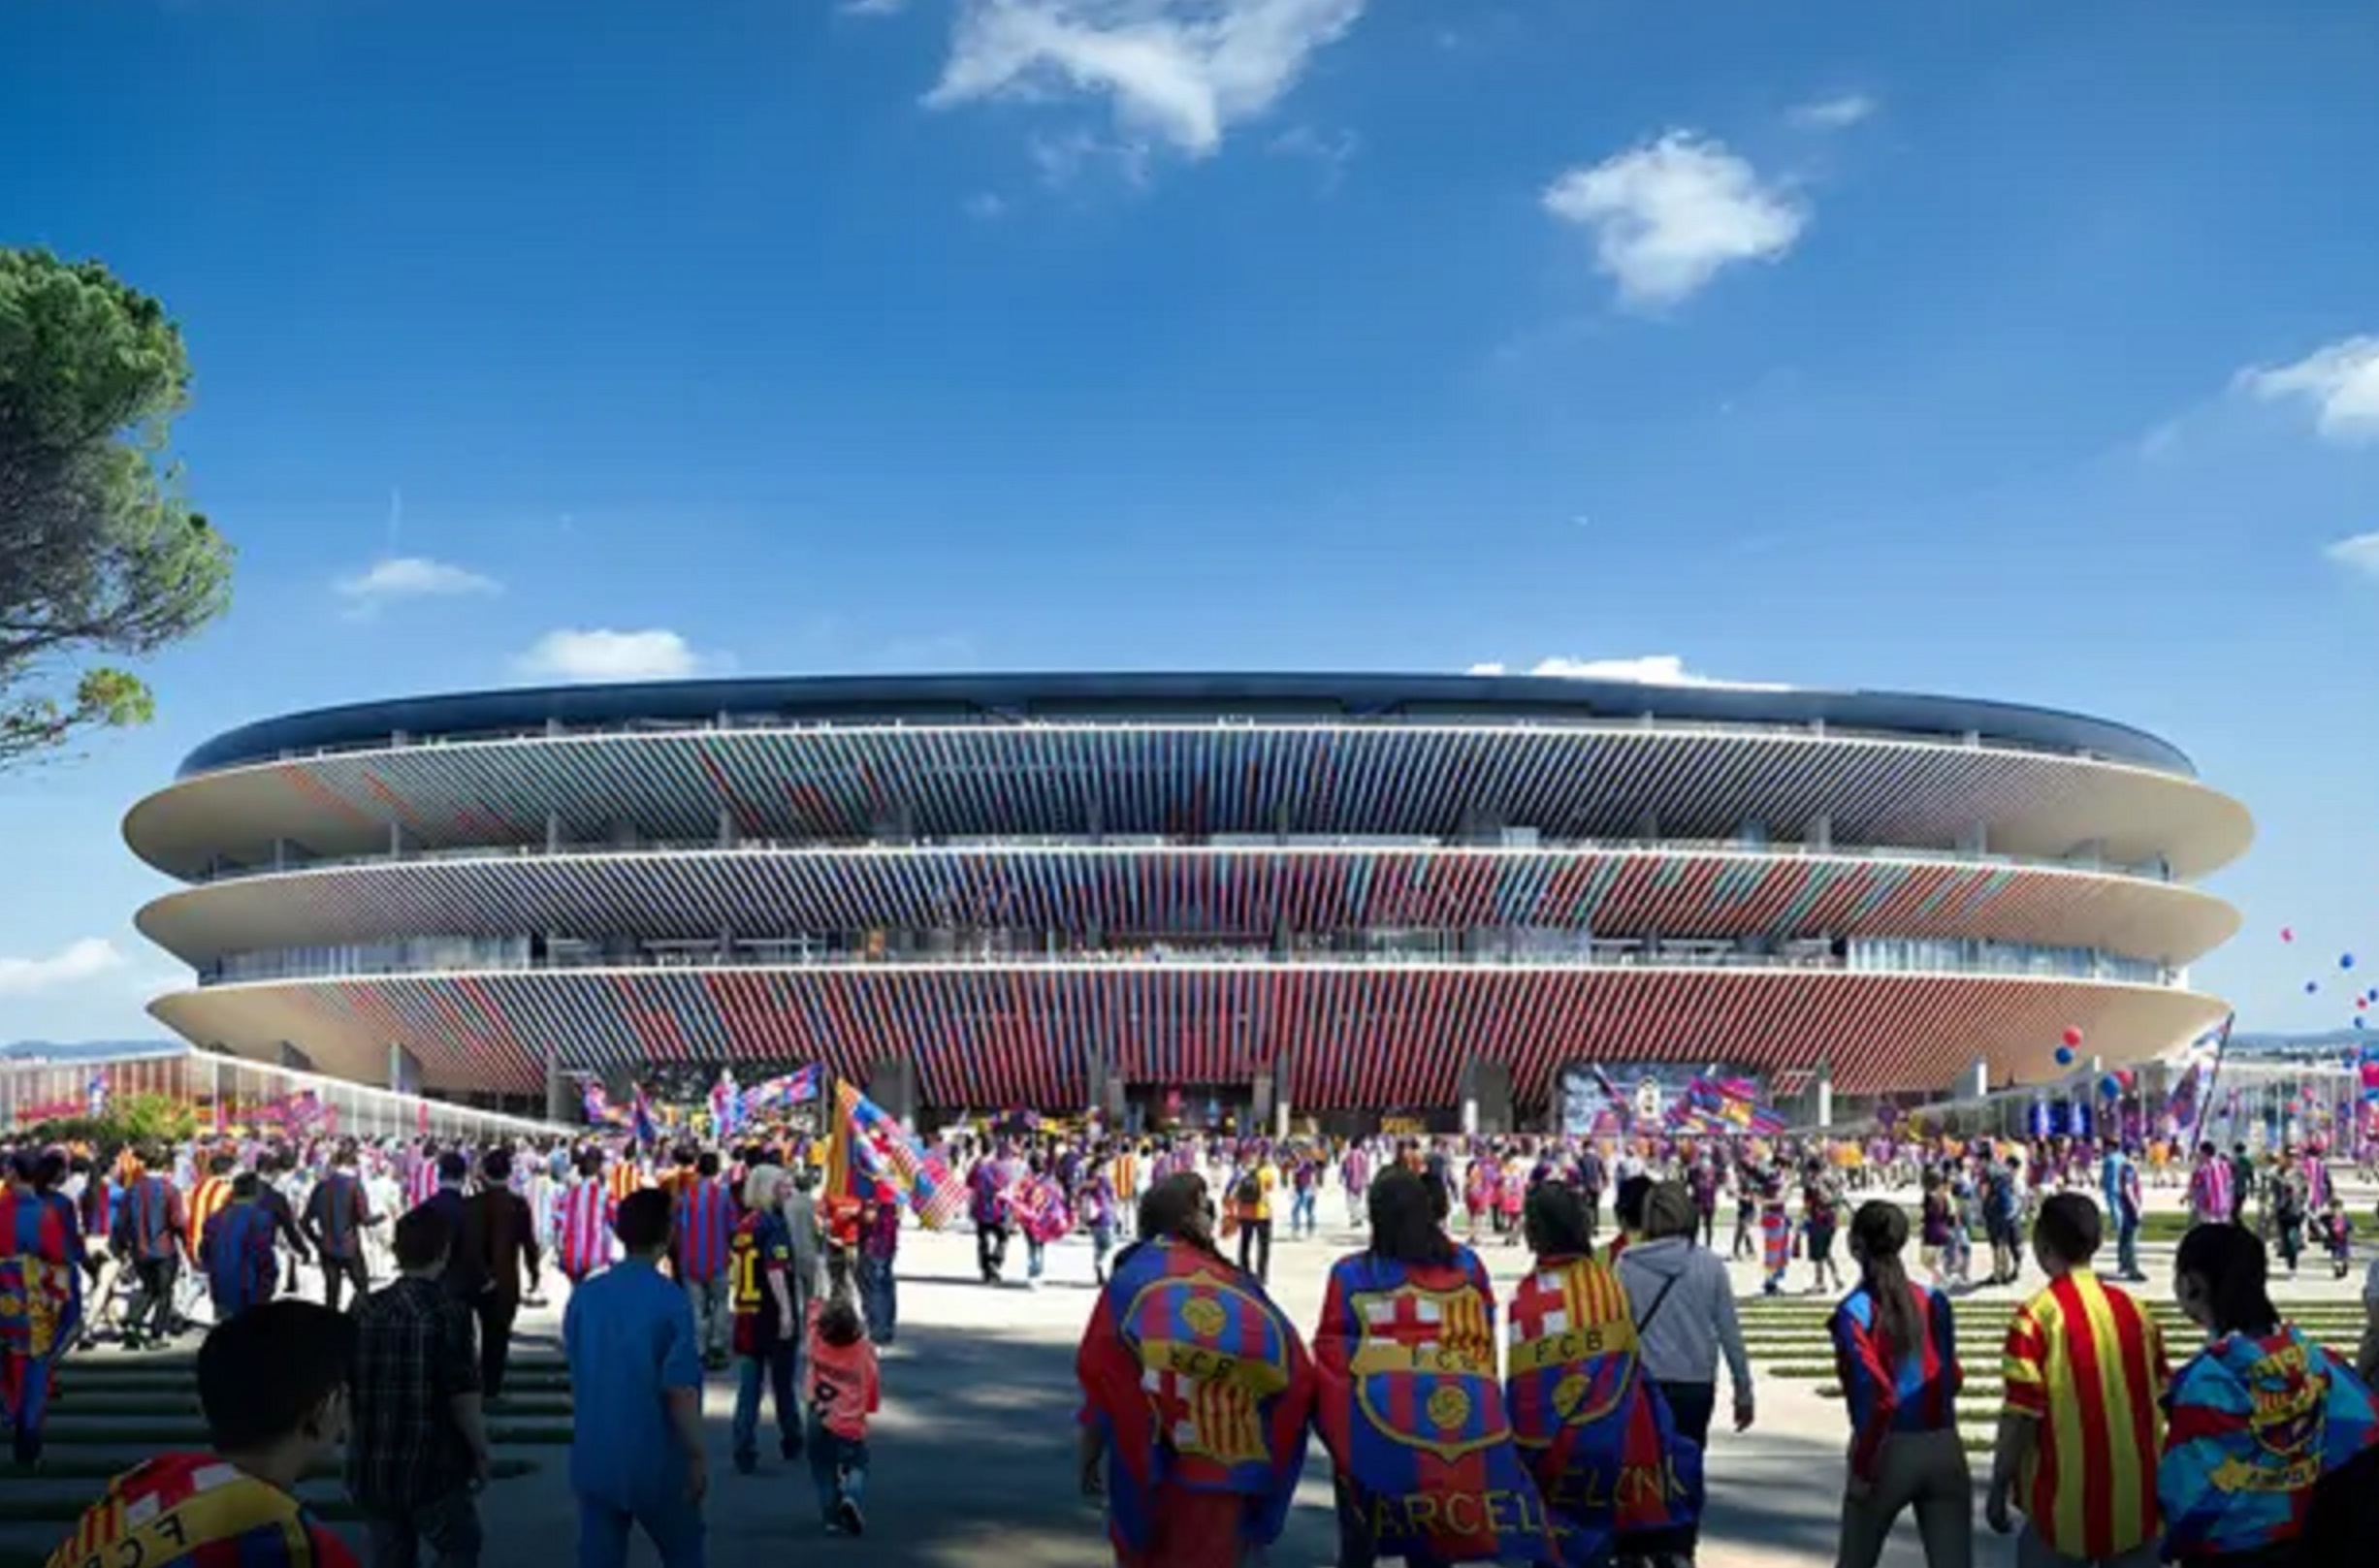 REDEVELOPMENT FOR EUROPE’S LARGEST FOOTBALL STADIUM RECEIVES TOP ACCOLADE